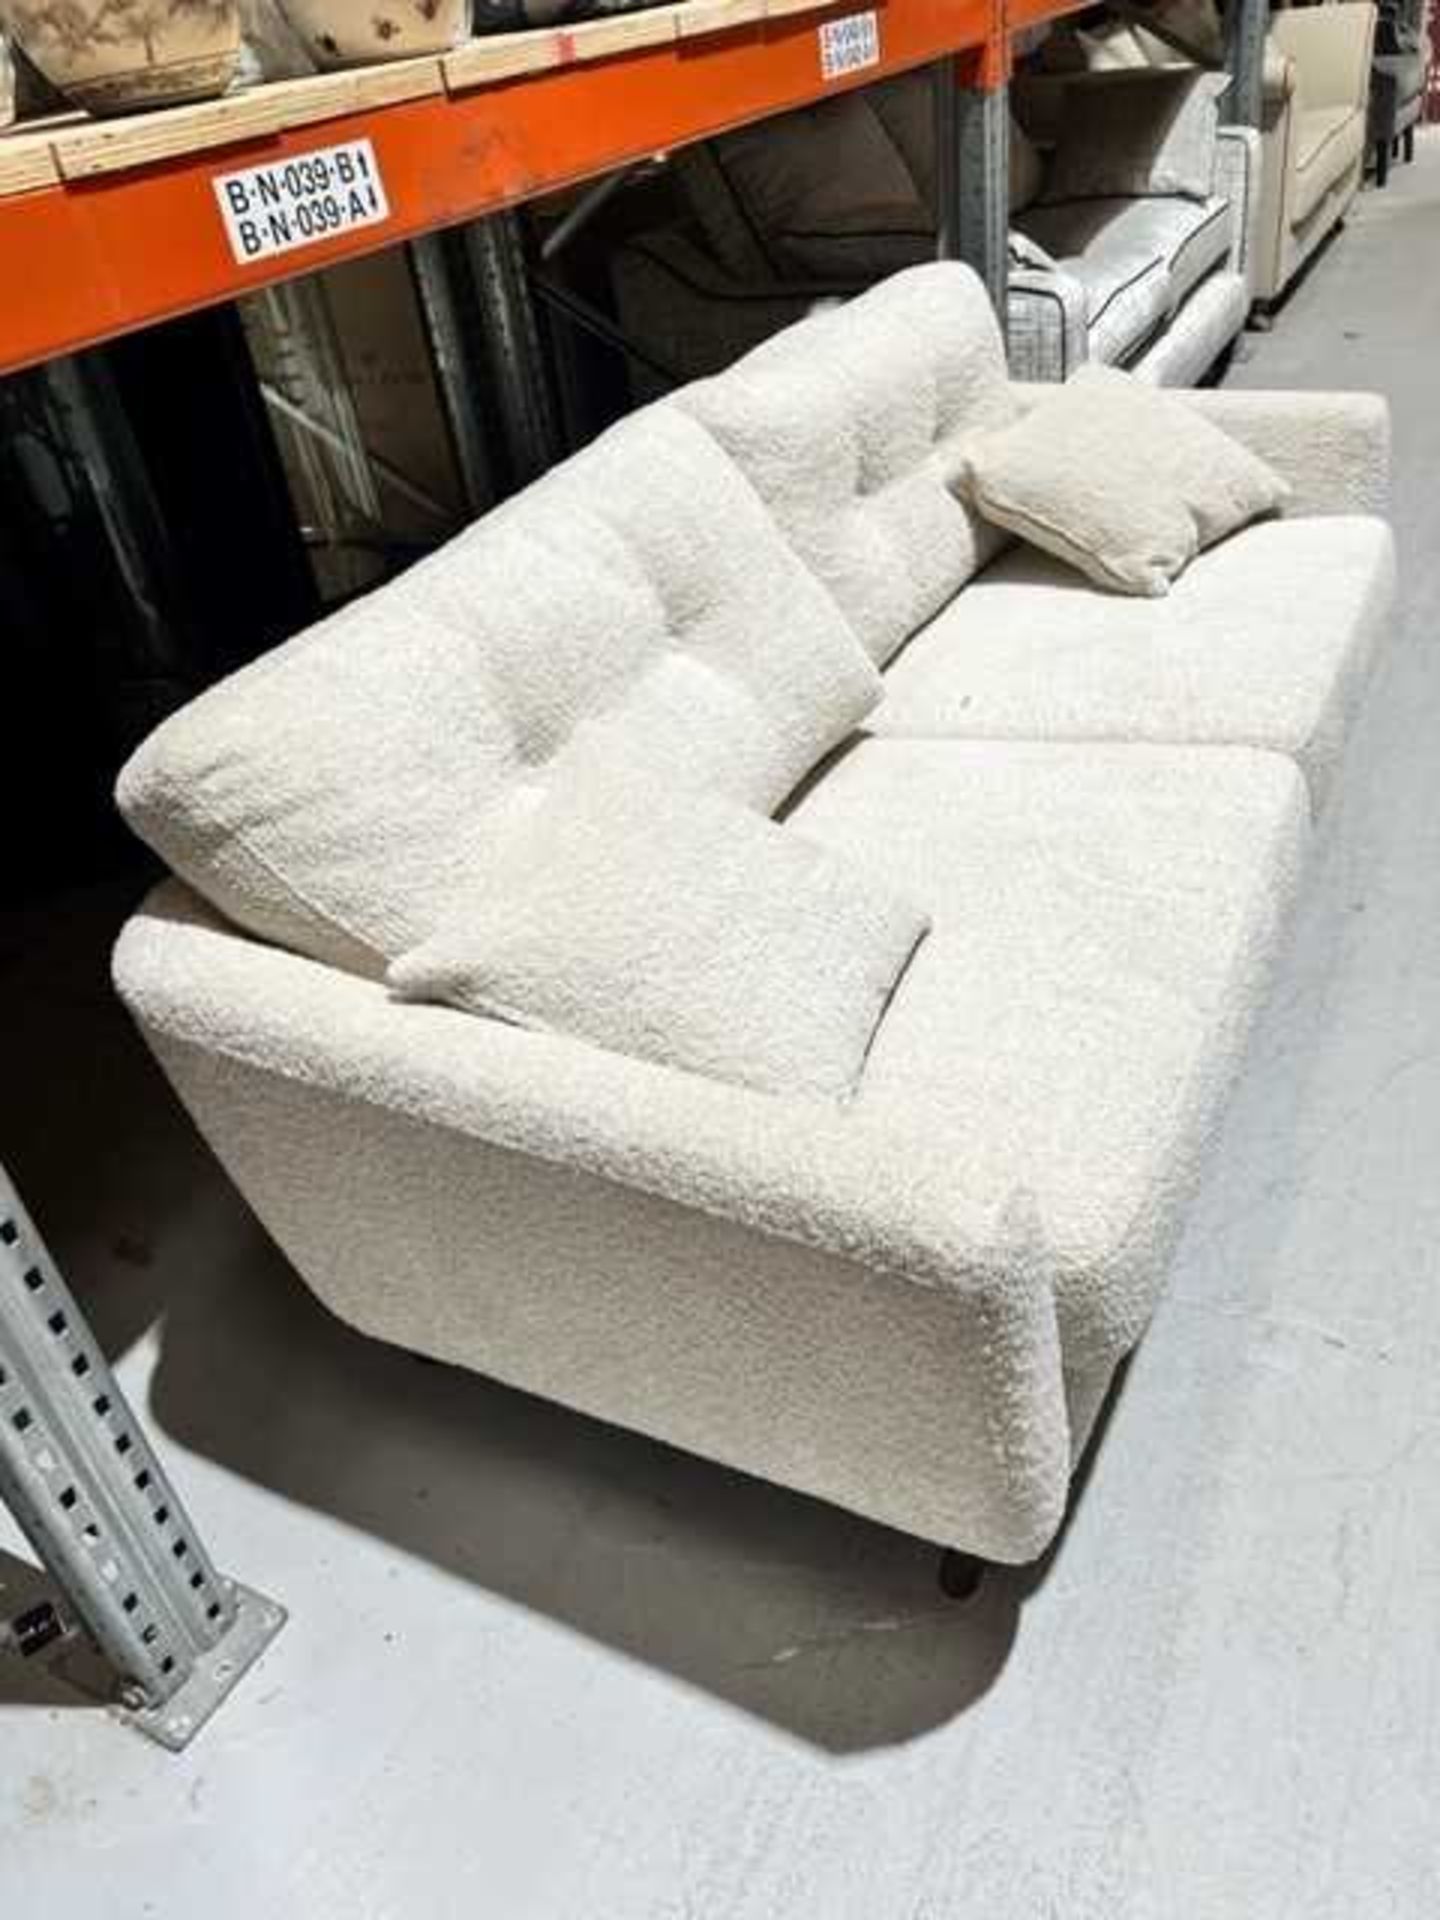 +VAT 1950's style oatmeal 2 seater sofa in bouclette fabric Very nice condition, no obvious marks - Image 2 of 4